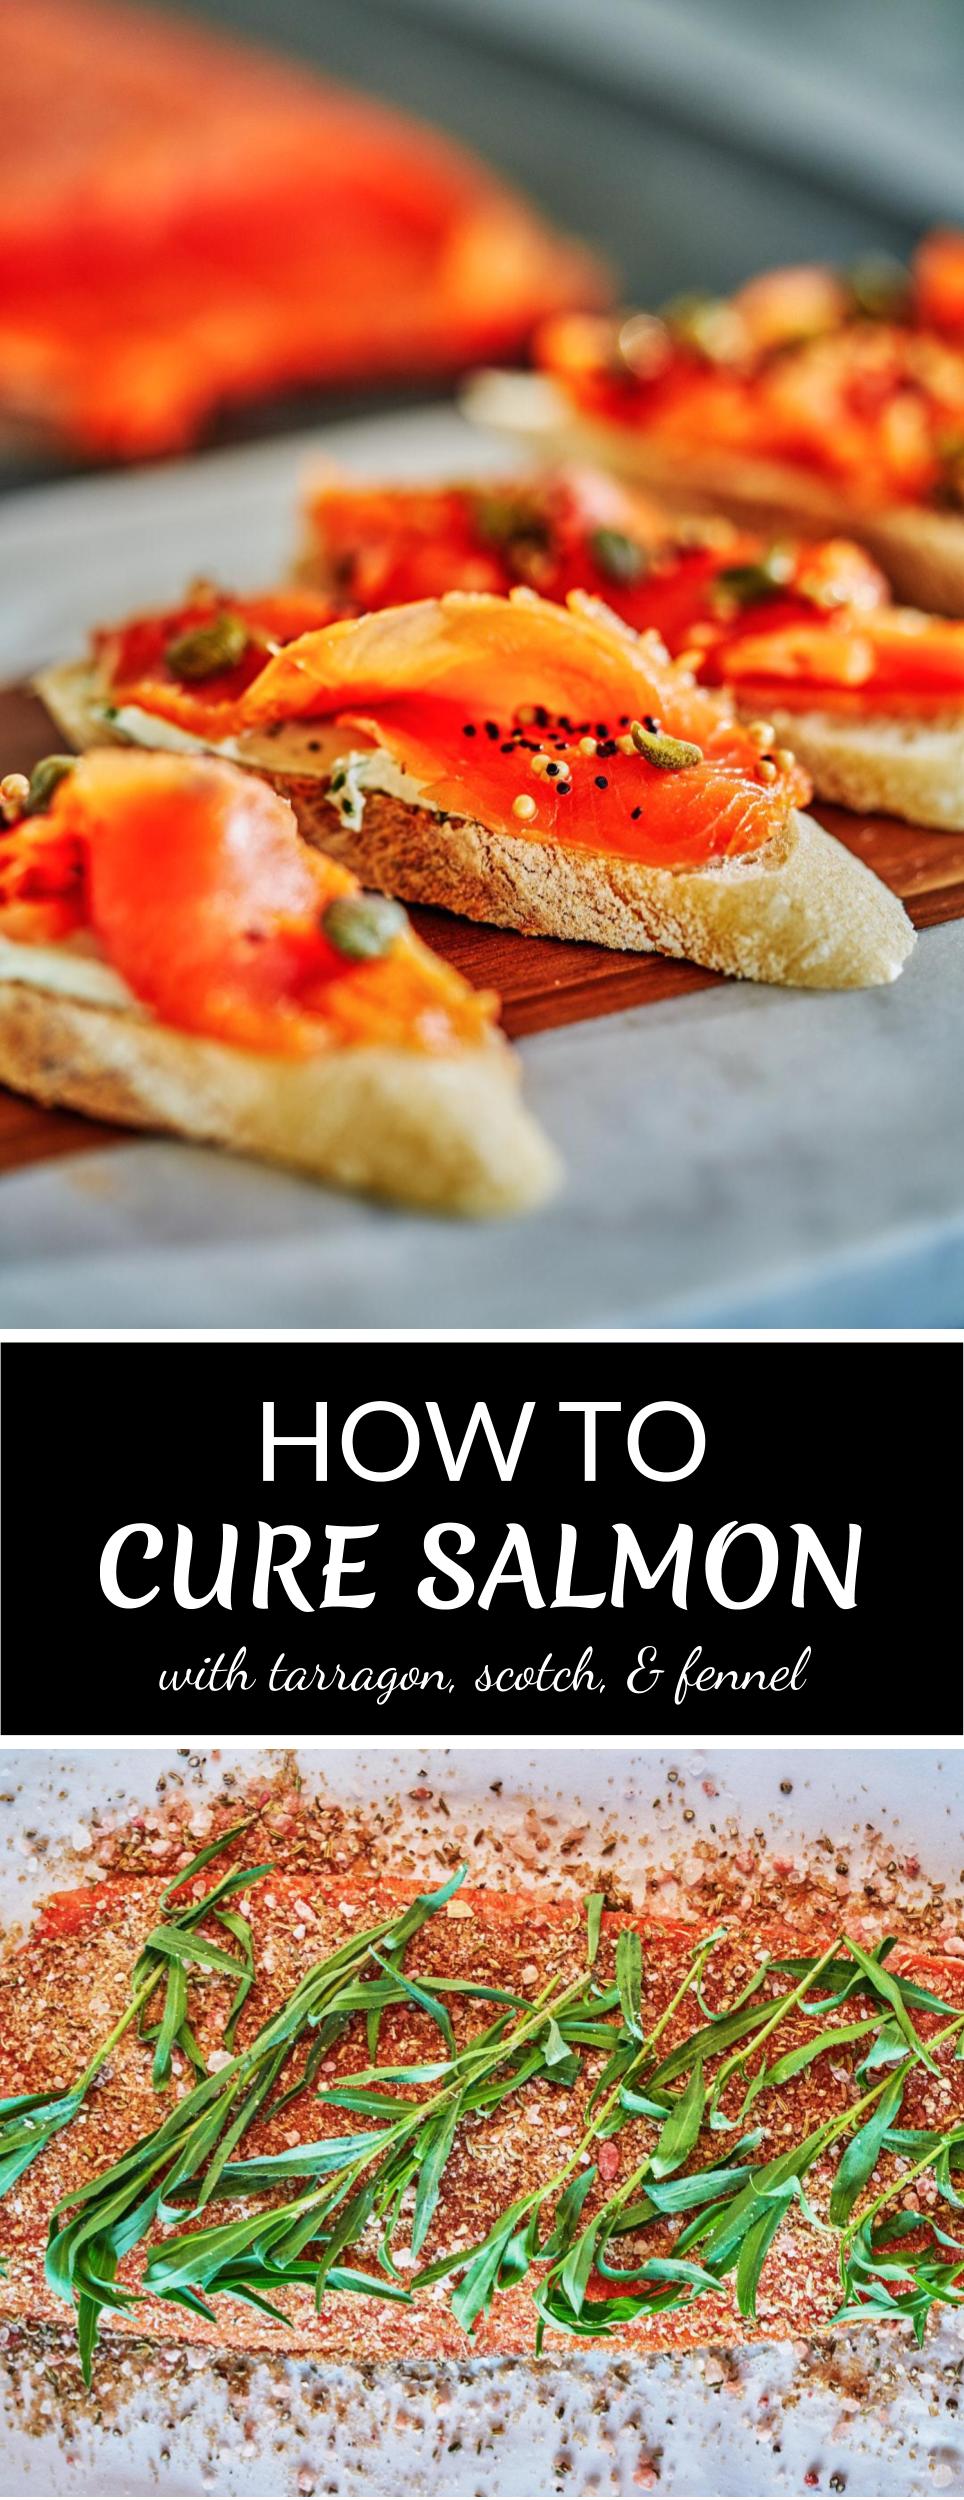 Tarragon & Fennel Scotch Cured Salmon - How to Cure Salmon | Proportional Plate